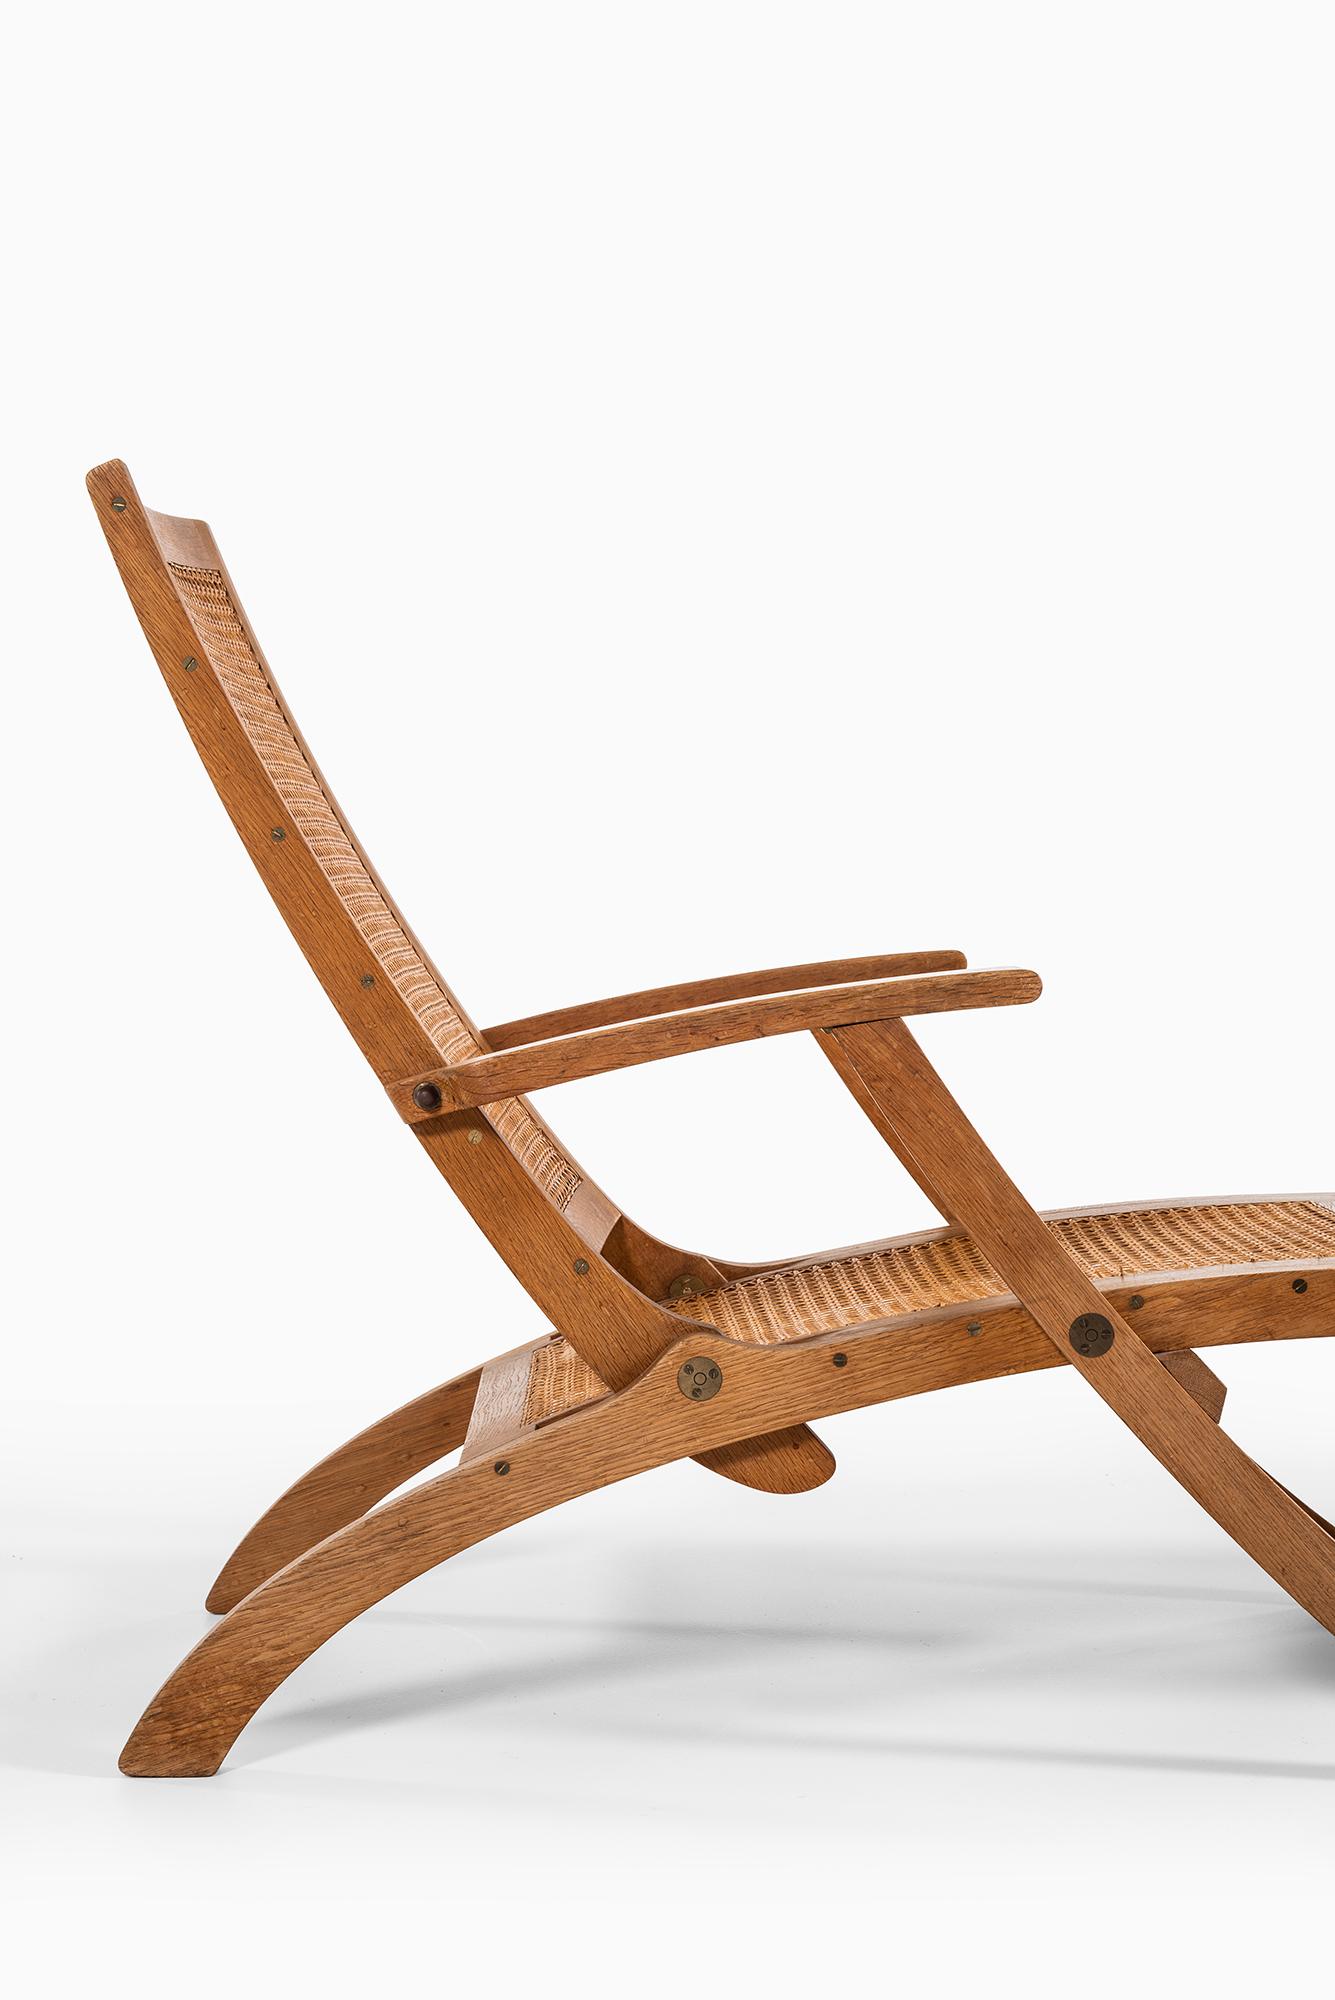 Very rare lounge chair designed by Kaare Klint. Produced by Rud Rasmussen in Denmark.